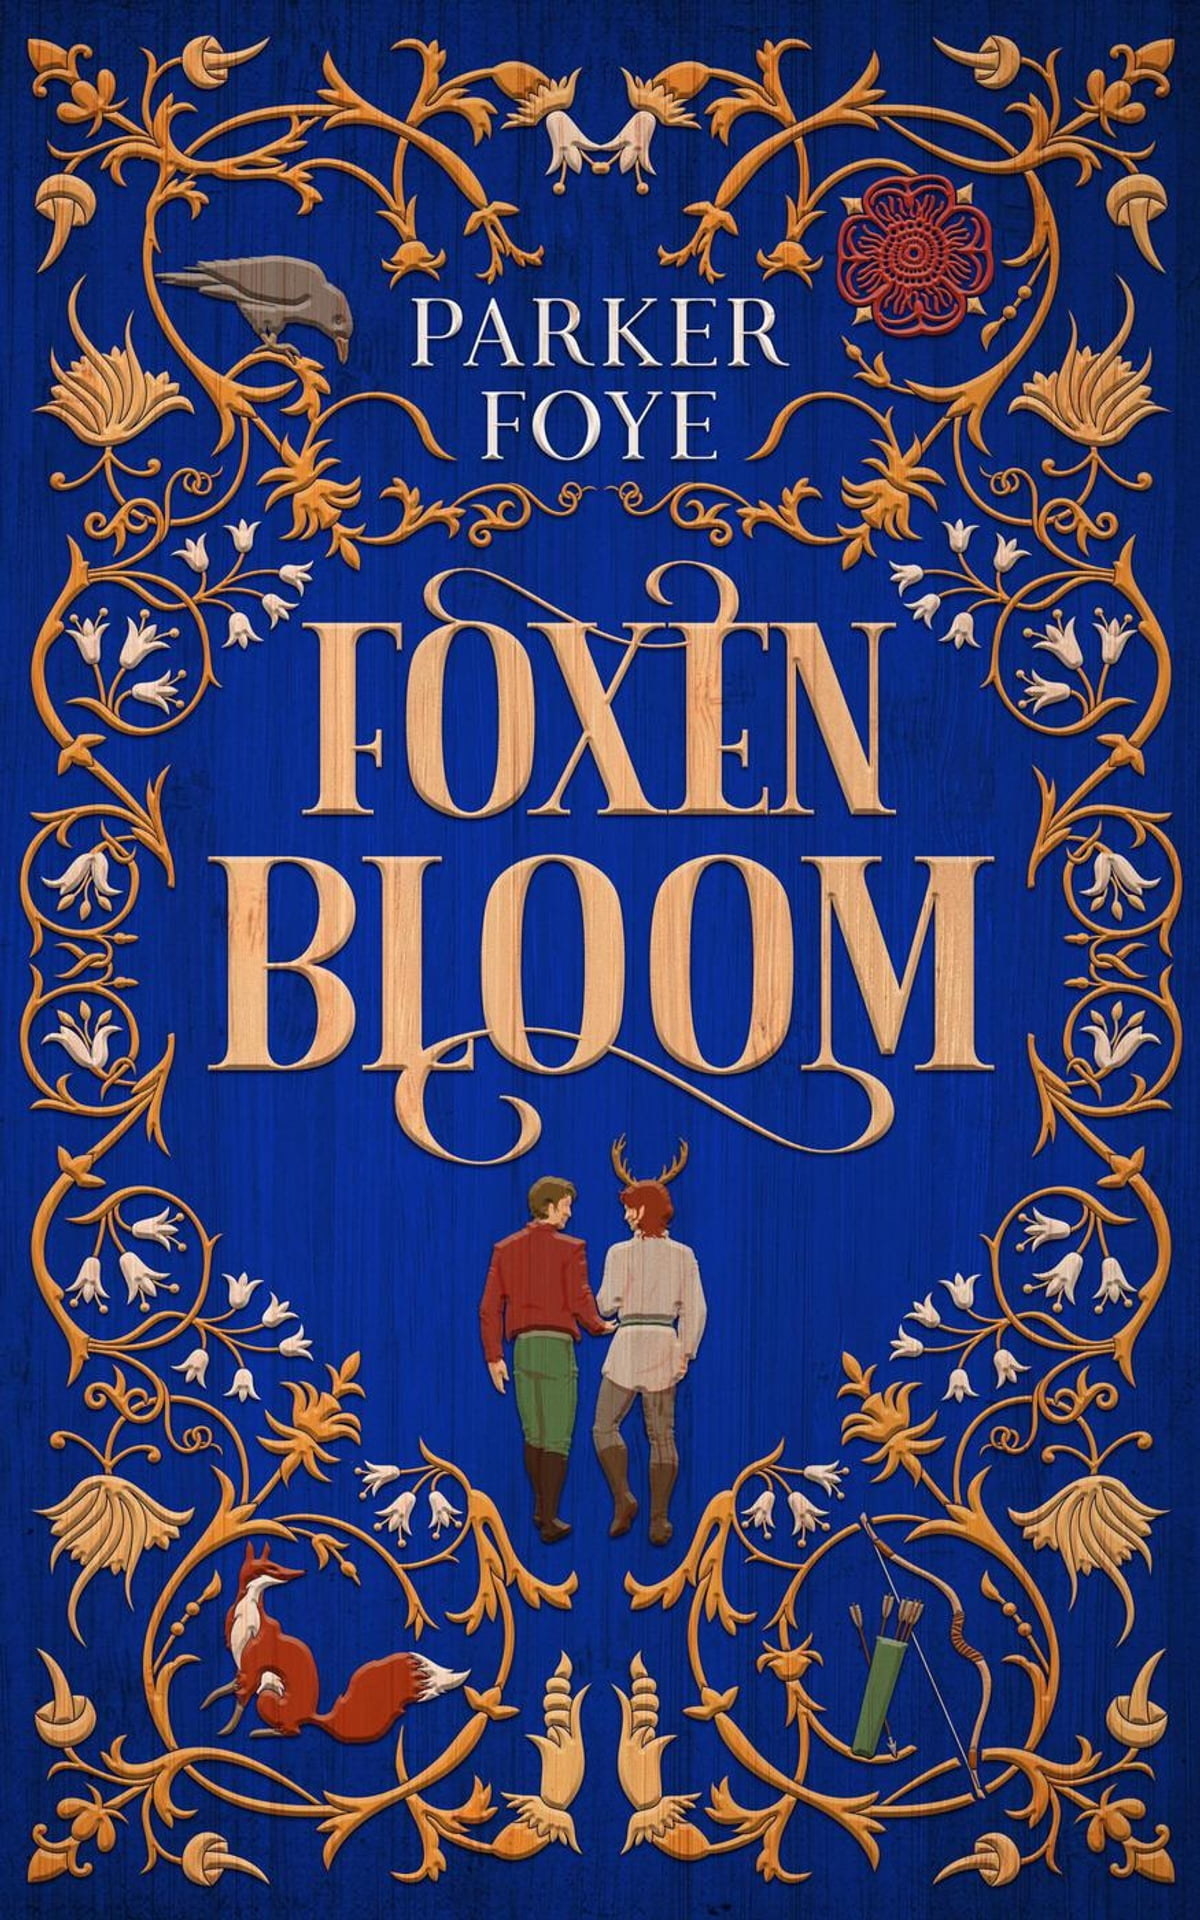 Foxen Bloom book cover. Book by Parker Foye.